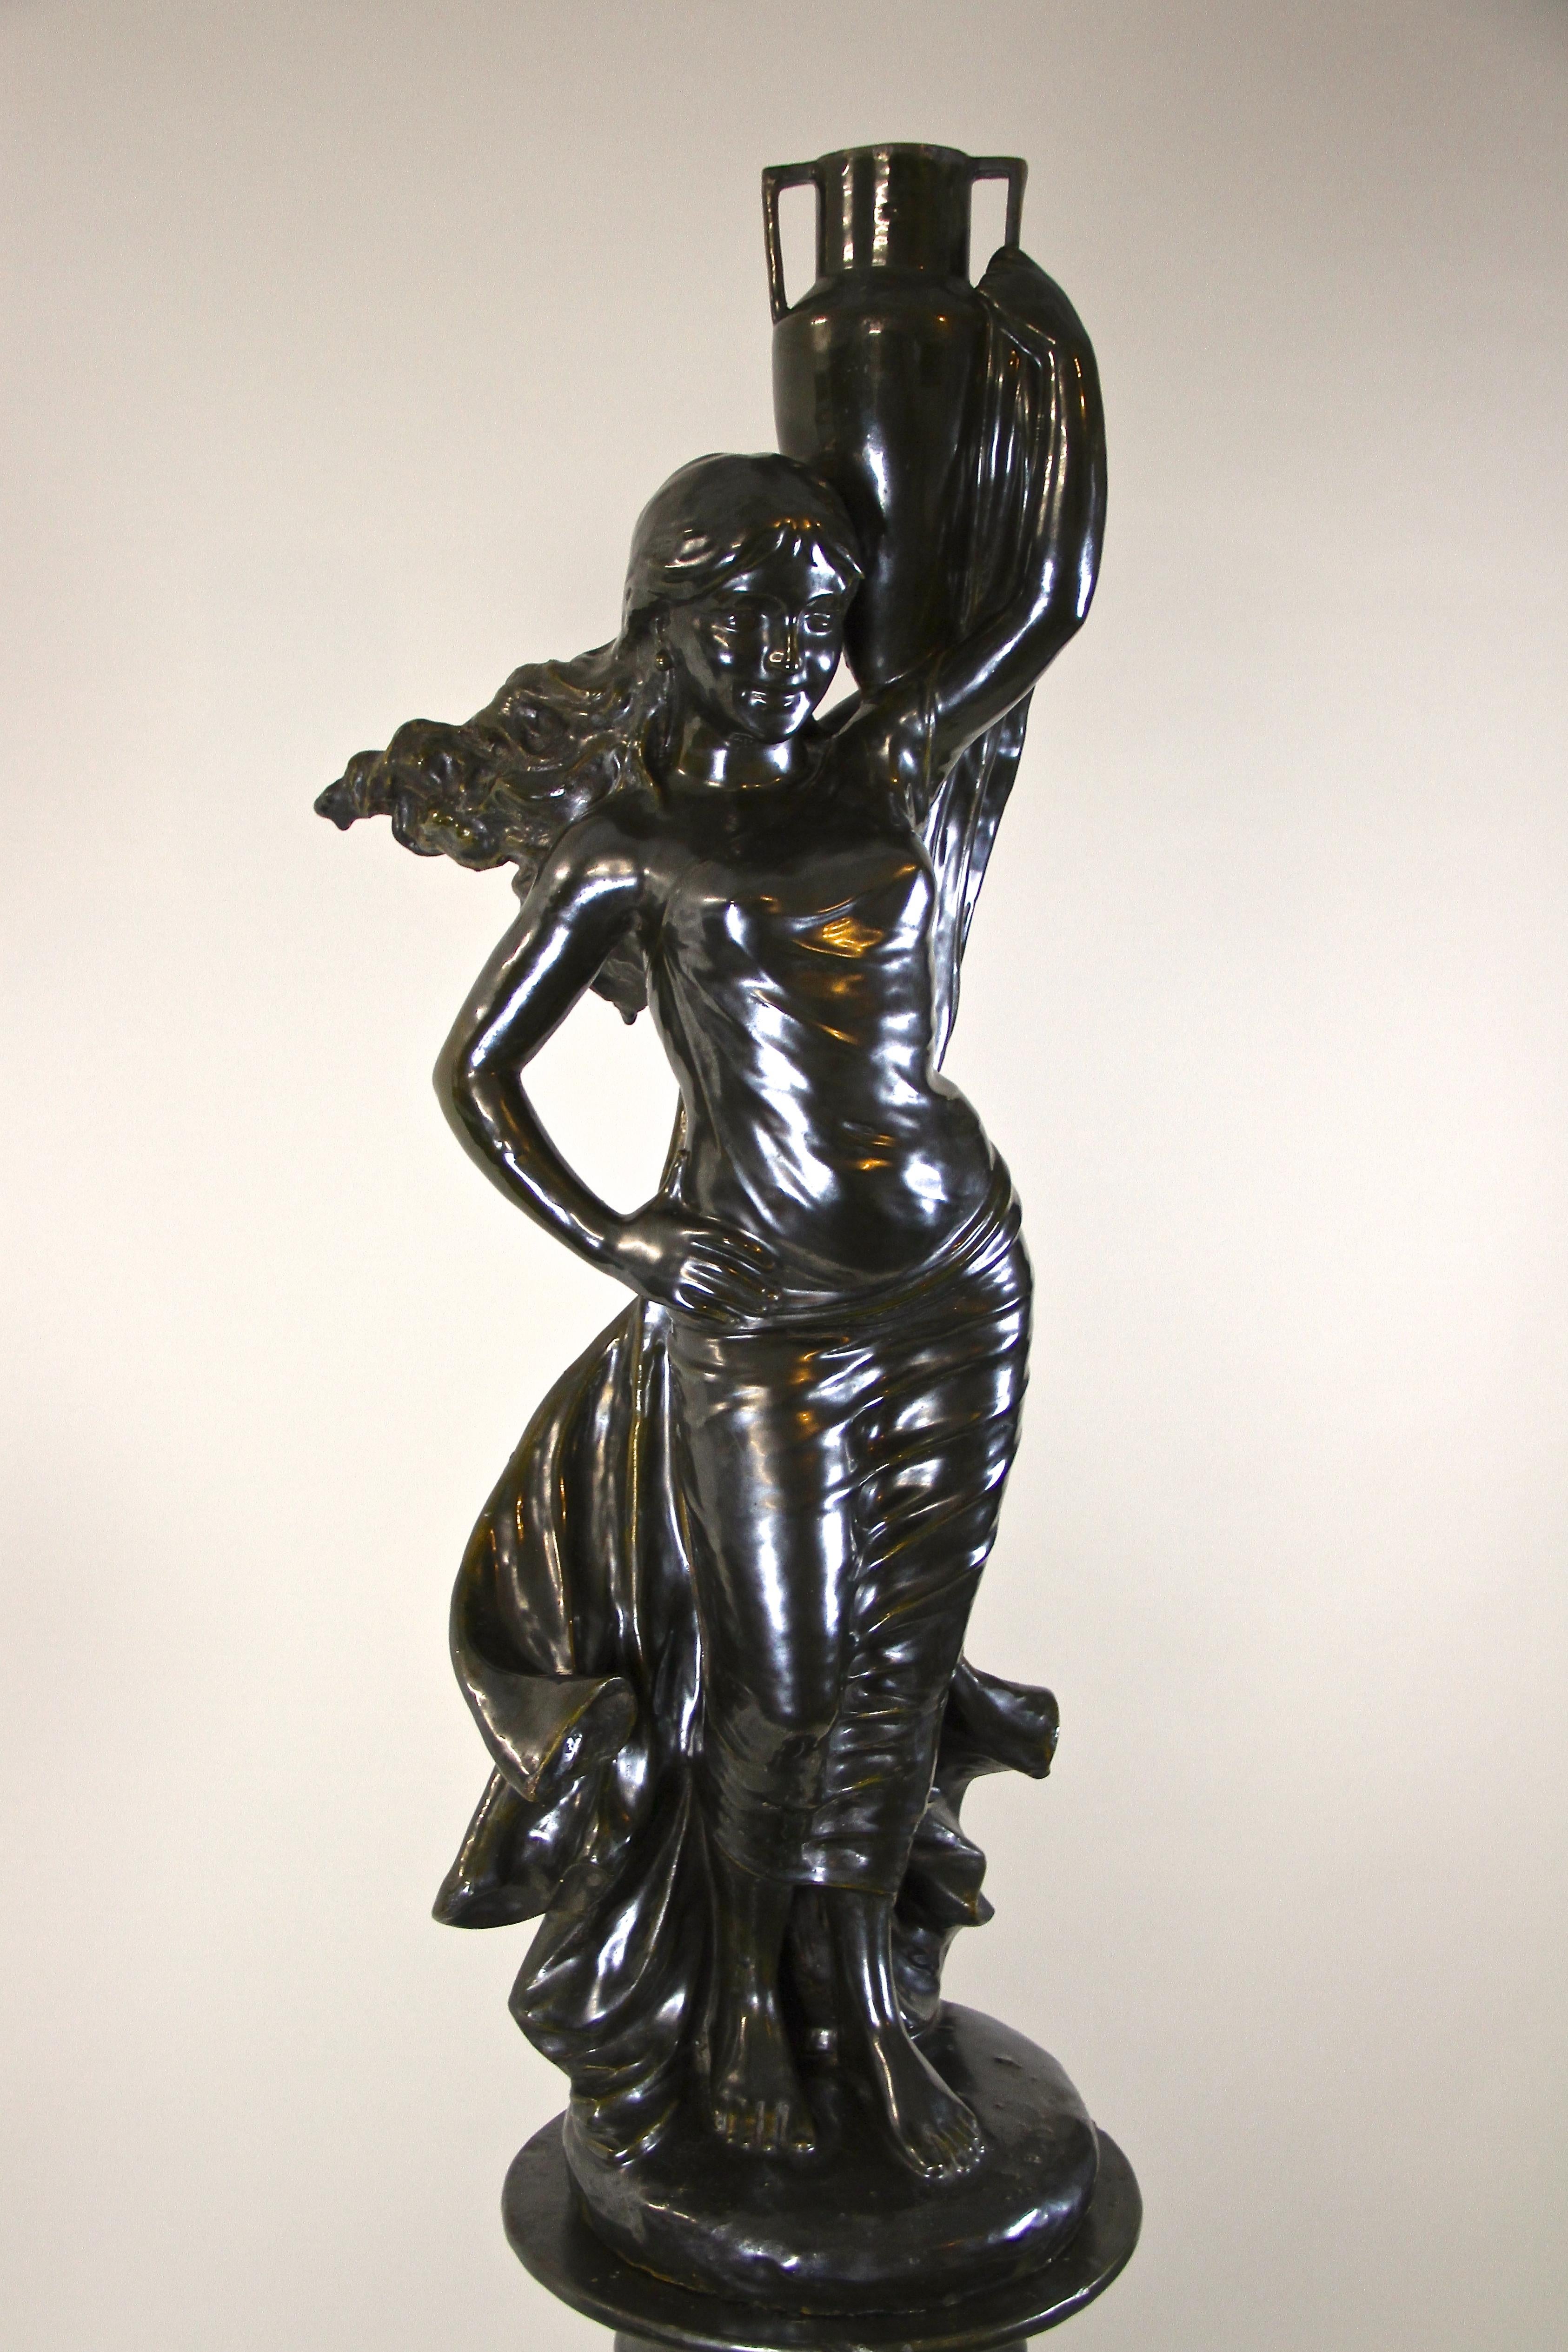 Remarkable Art Nouveau ceramic statue/ sculpture on column from the early 20th century in France. This absolute artfully shaped, very large figurative masterpiece (height of 74.4